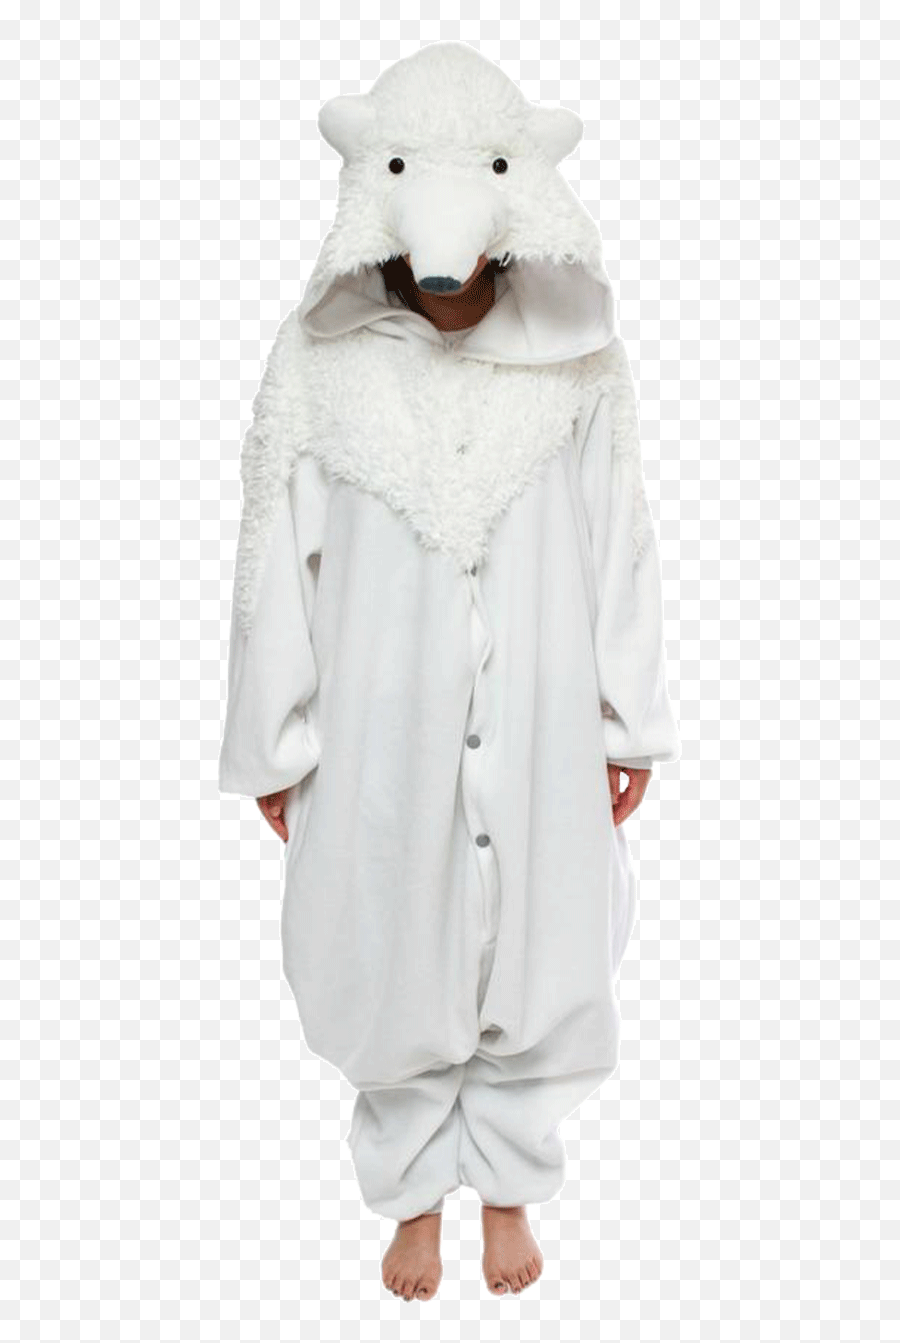 Bear Costumes For Adults And Kids - Fancydresscom Polar Bear Adult Onesie Emoji,Emoji Costumes For Sale